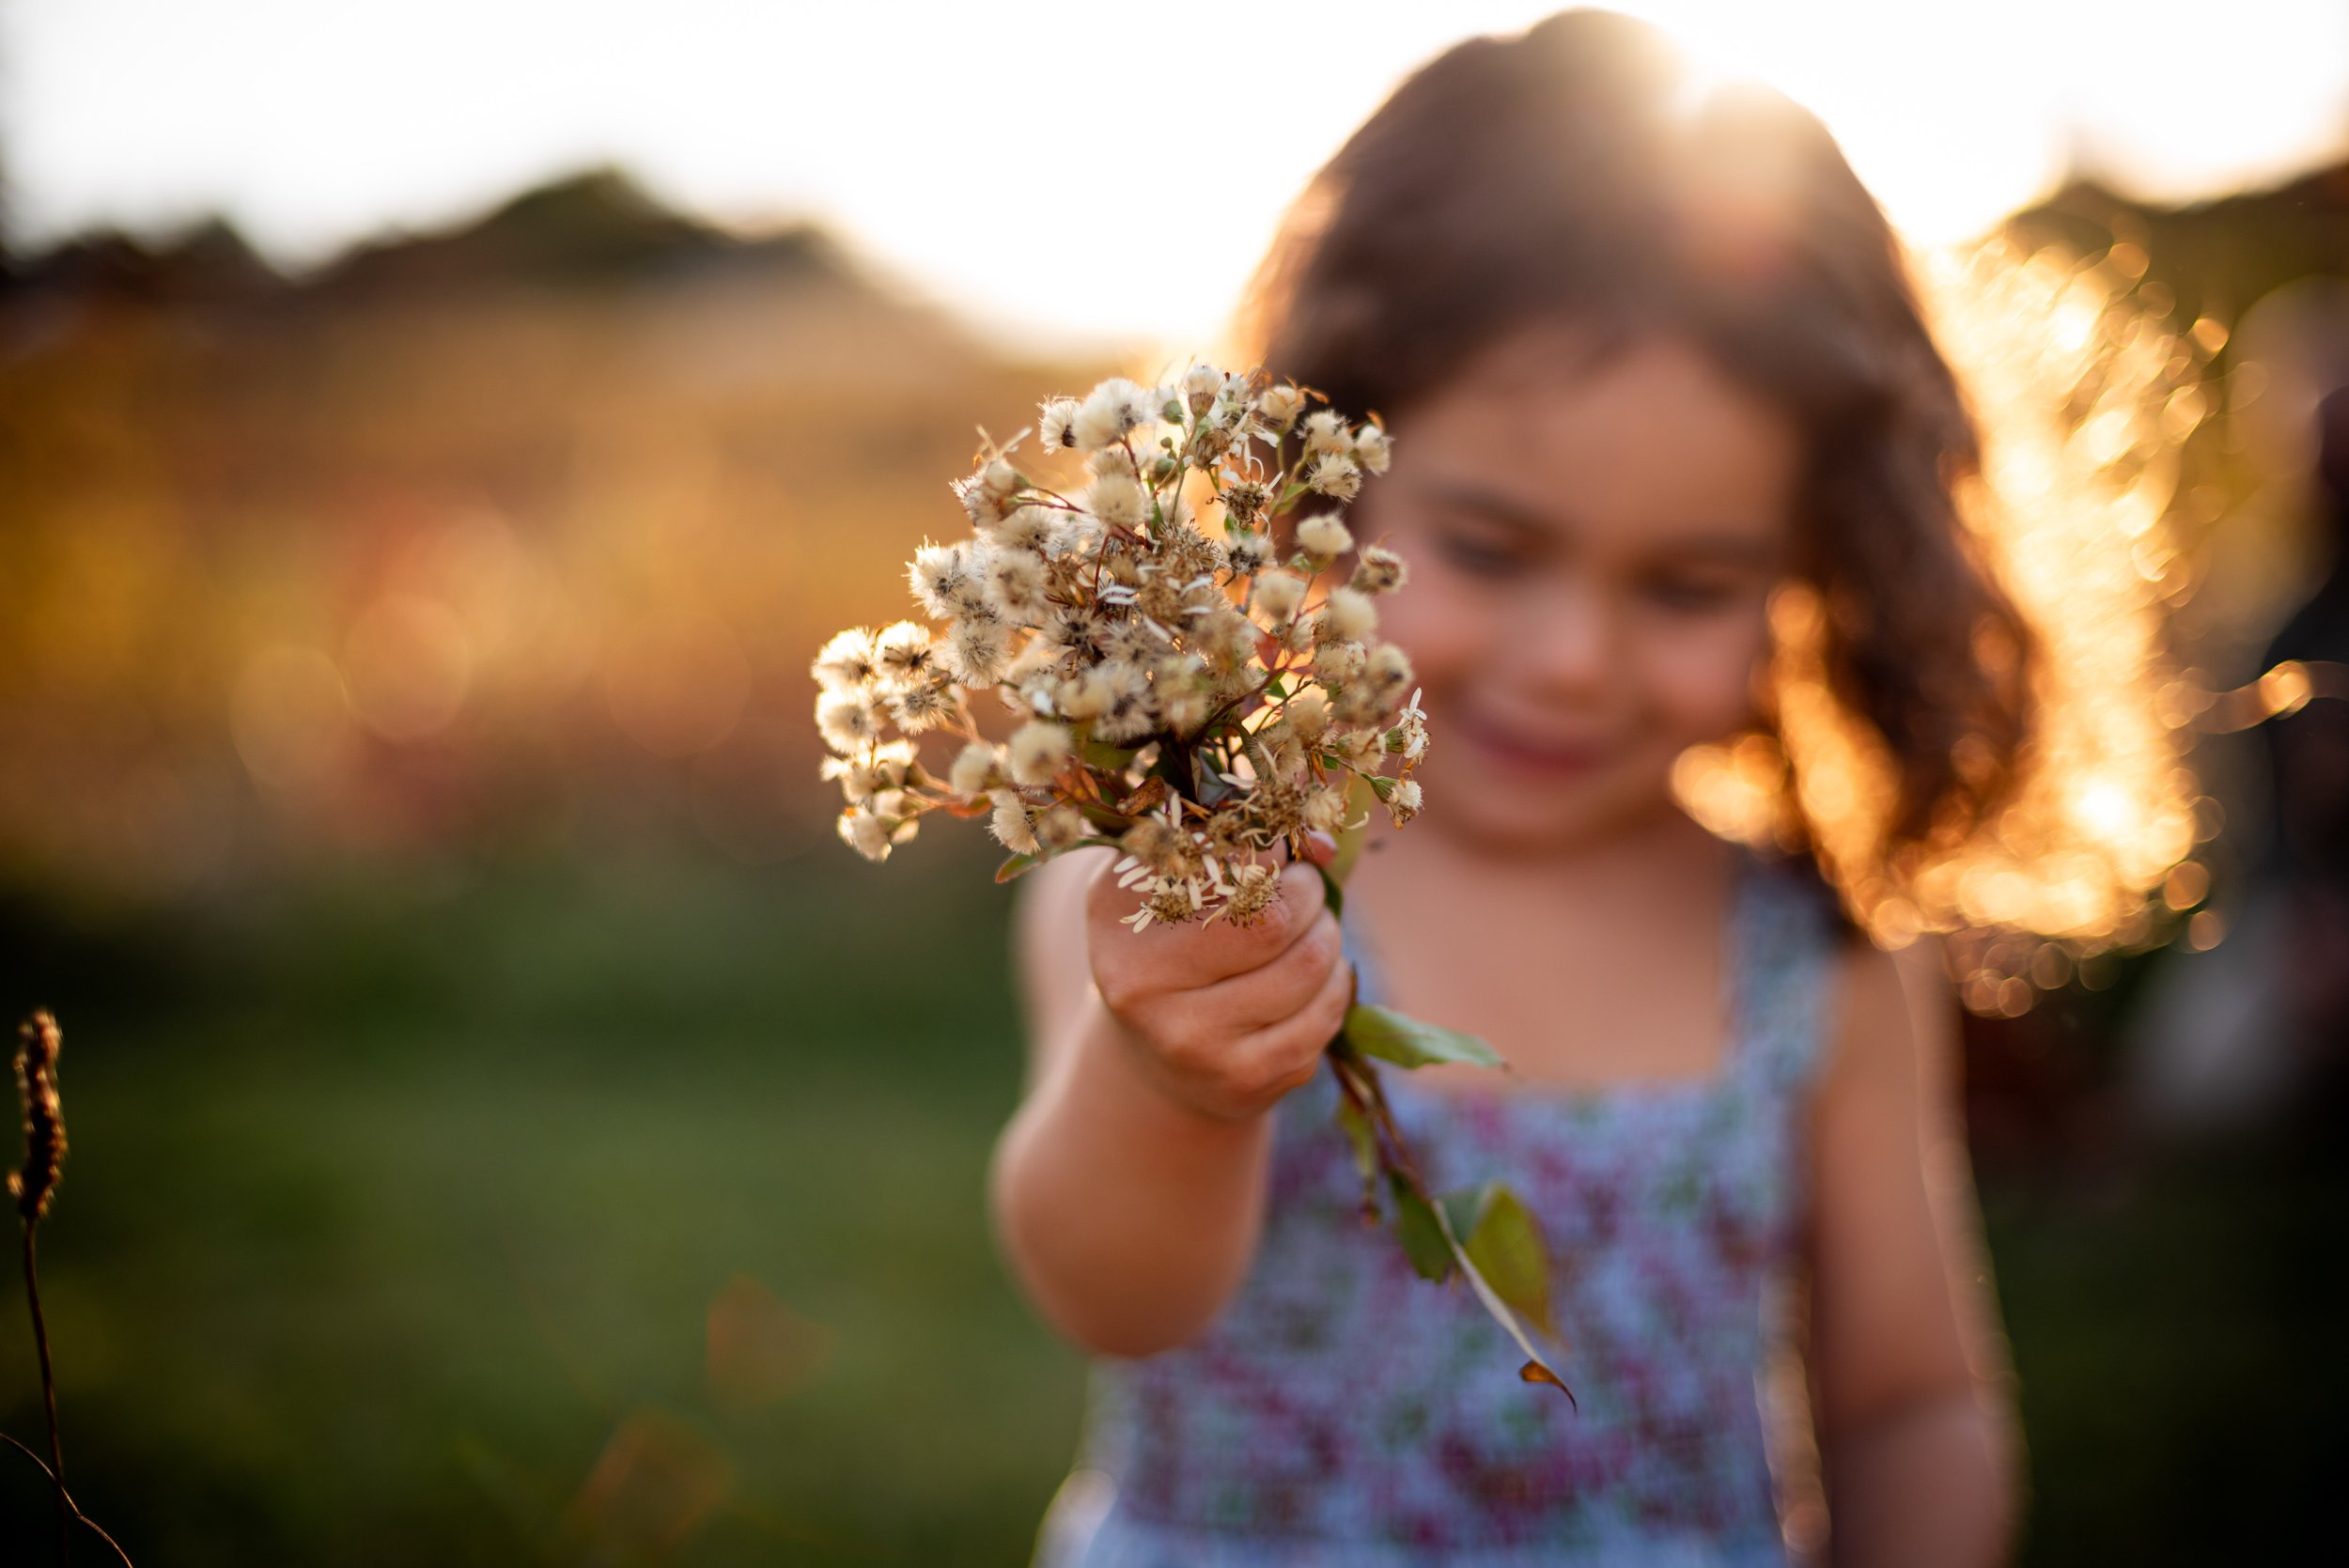 lindsay murphy photography | portland maine family photographer | fall wildflower field child playing golden hour.jpg